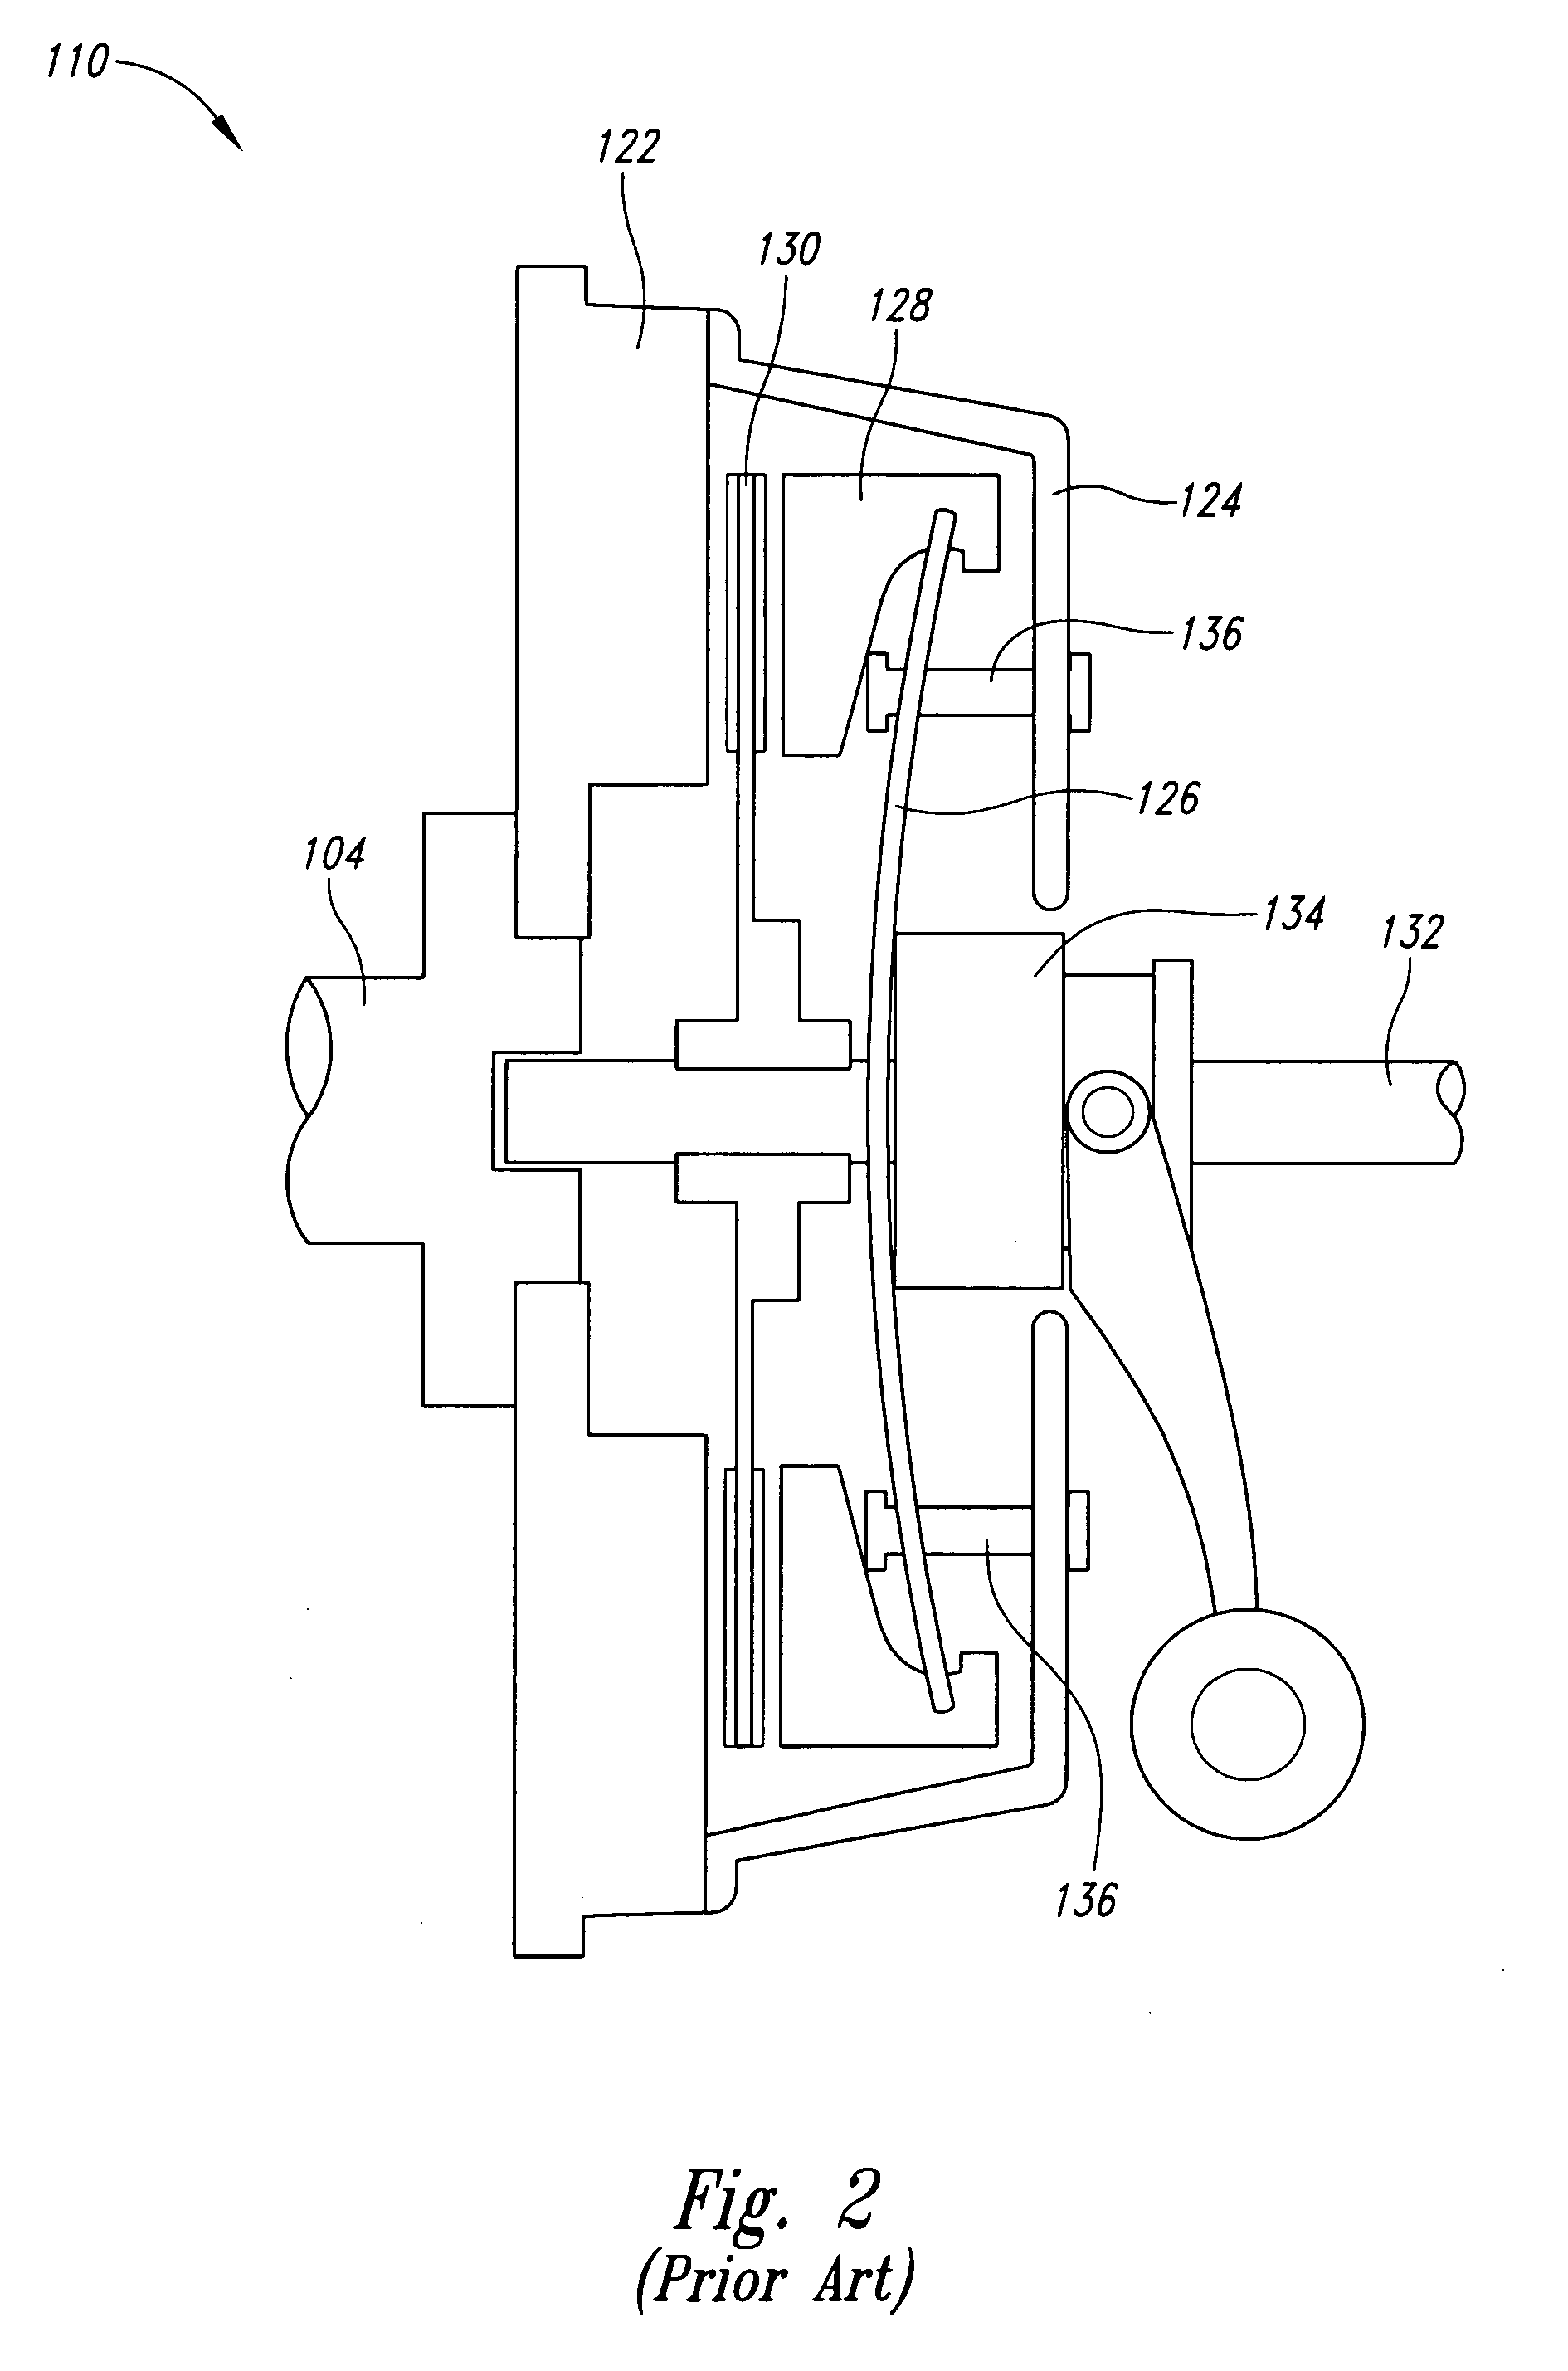 Vehicle drive-train including a clutchless transmission, and method of operation